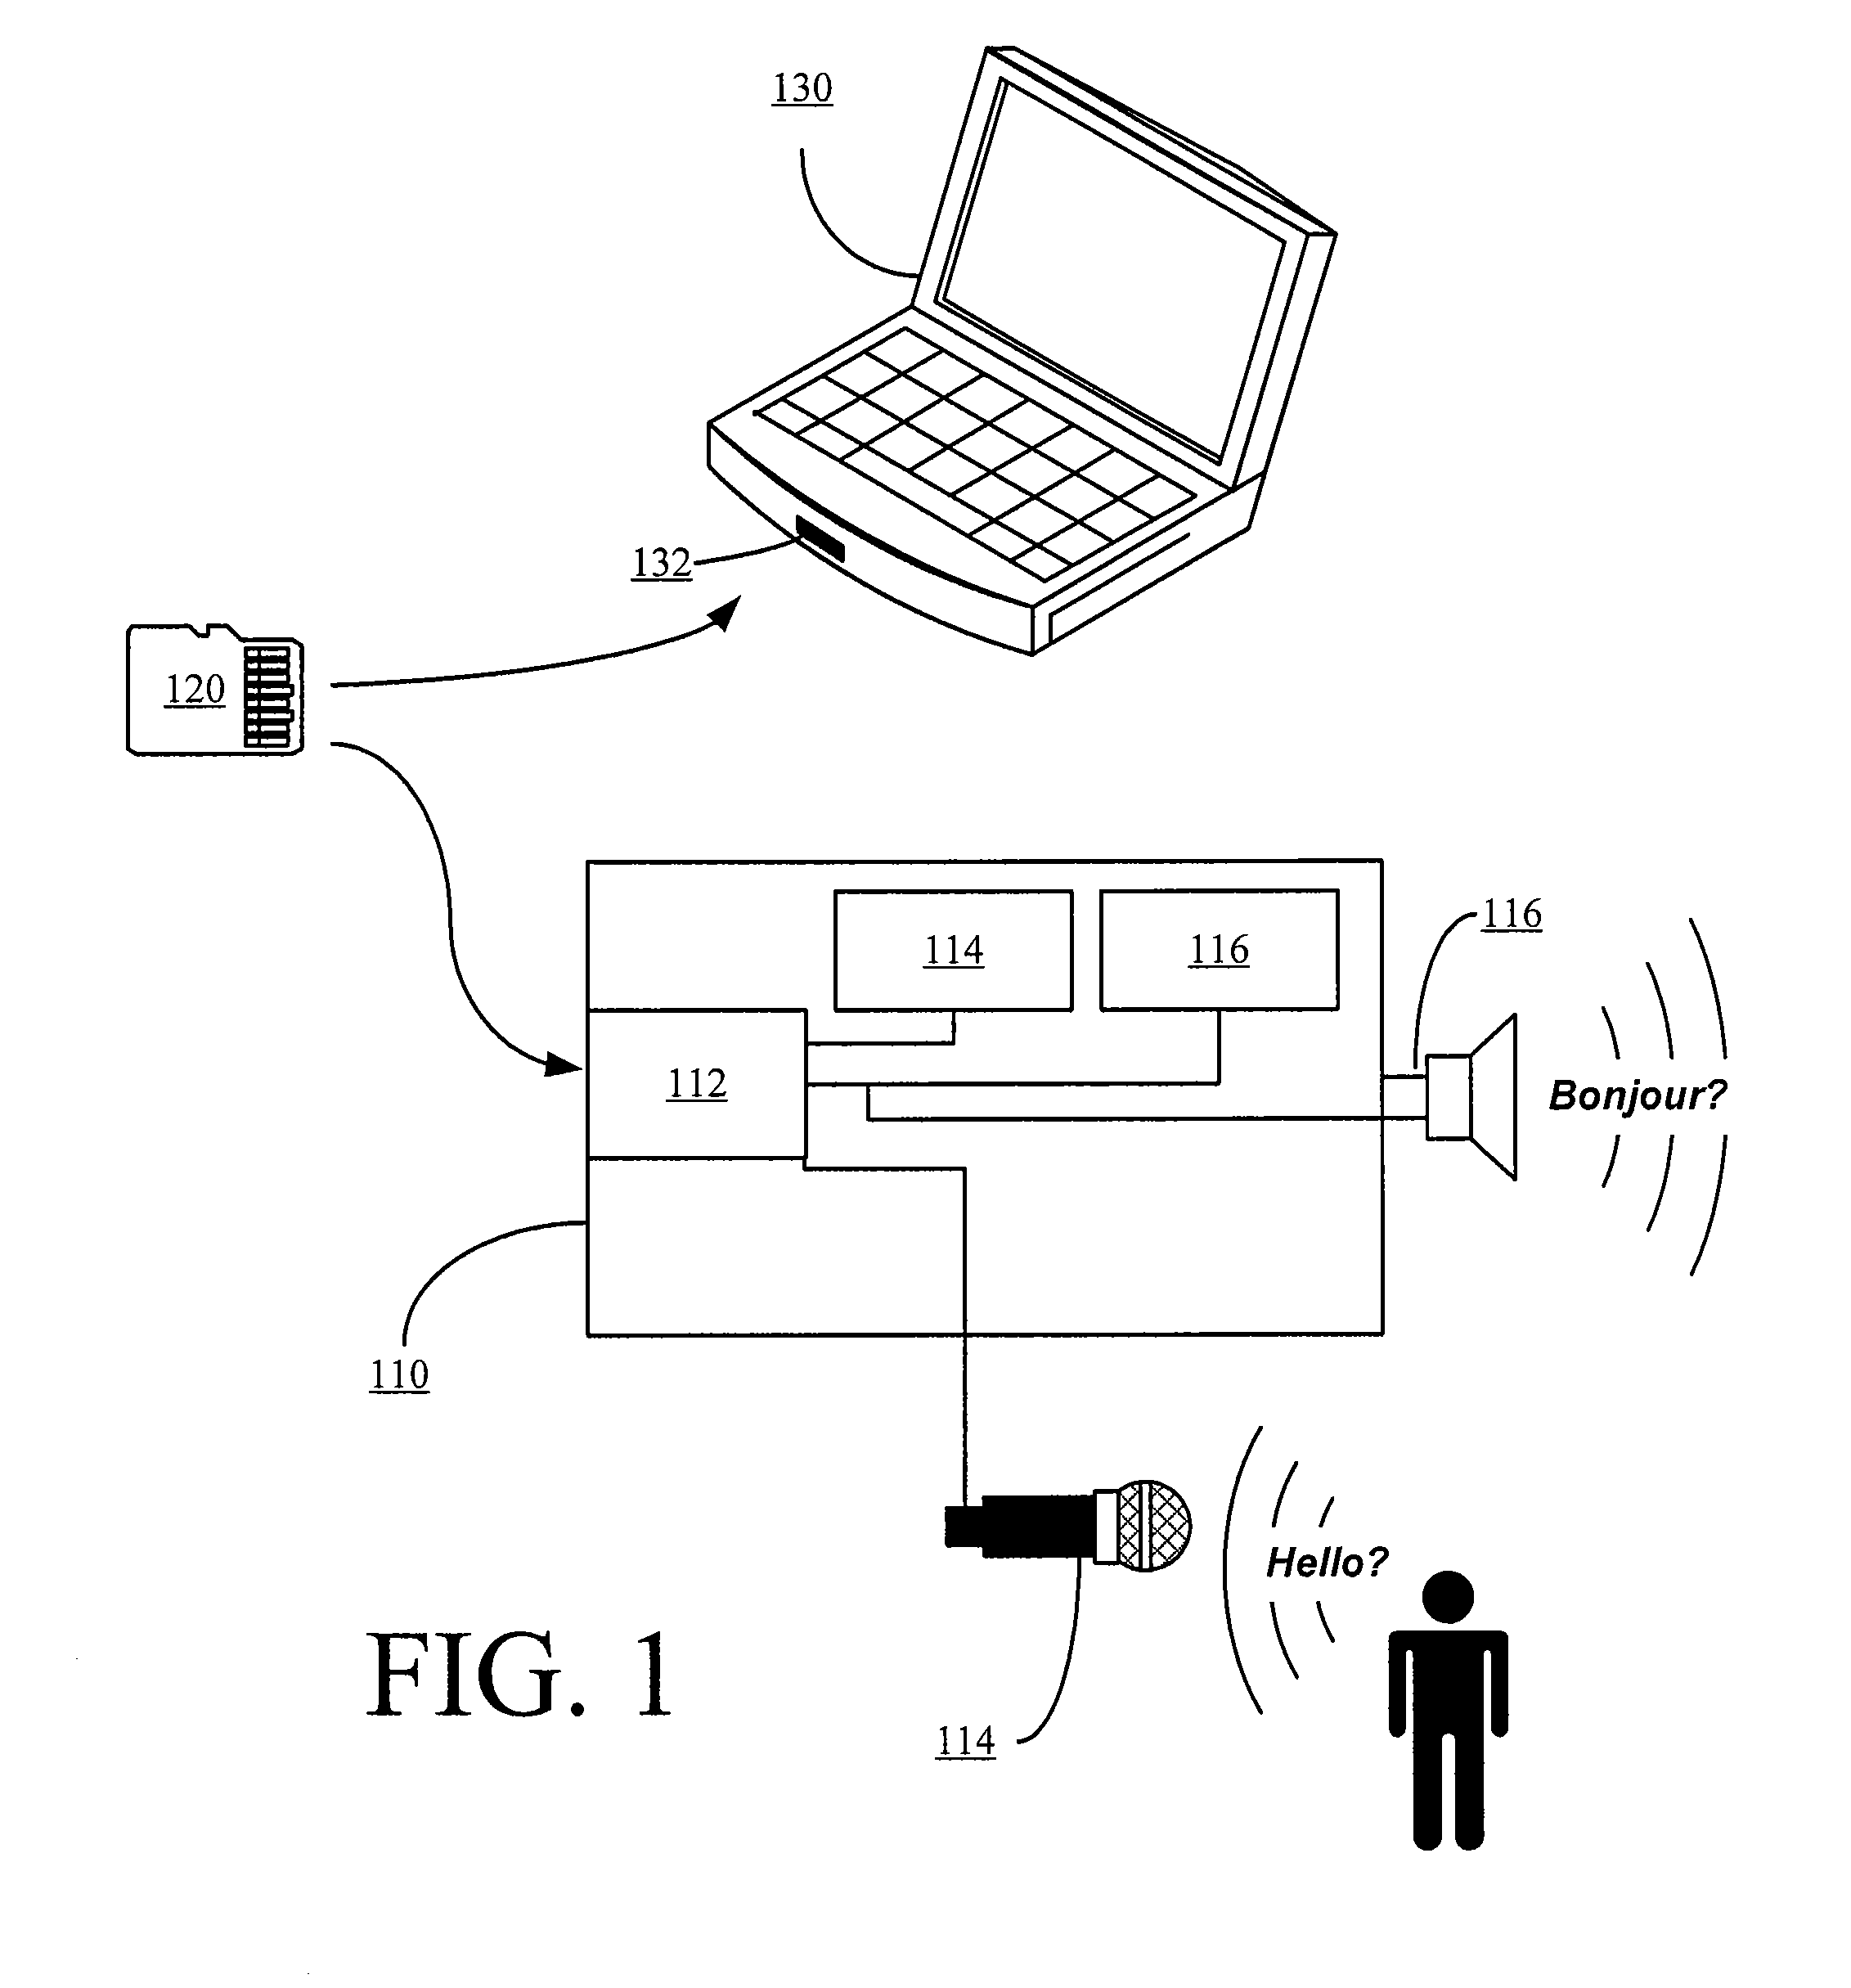 Electronic devices using removable and programmable active processing modules